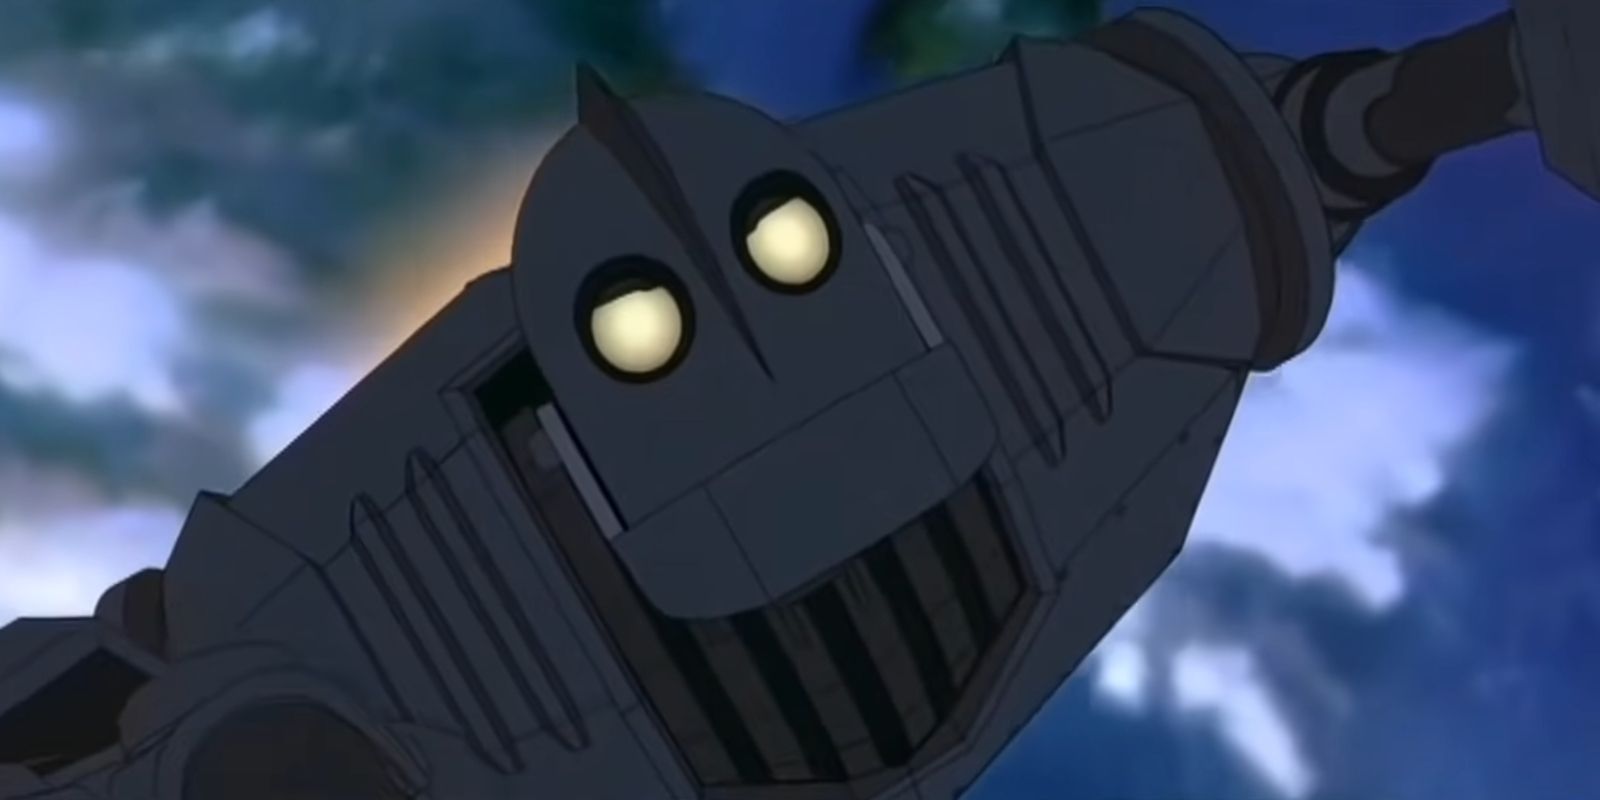 The Giant sacrificing himself in The Iron Giant